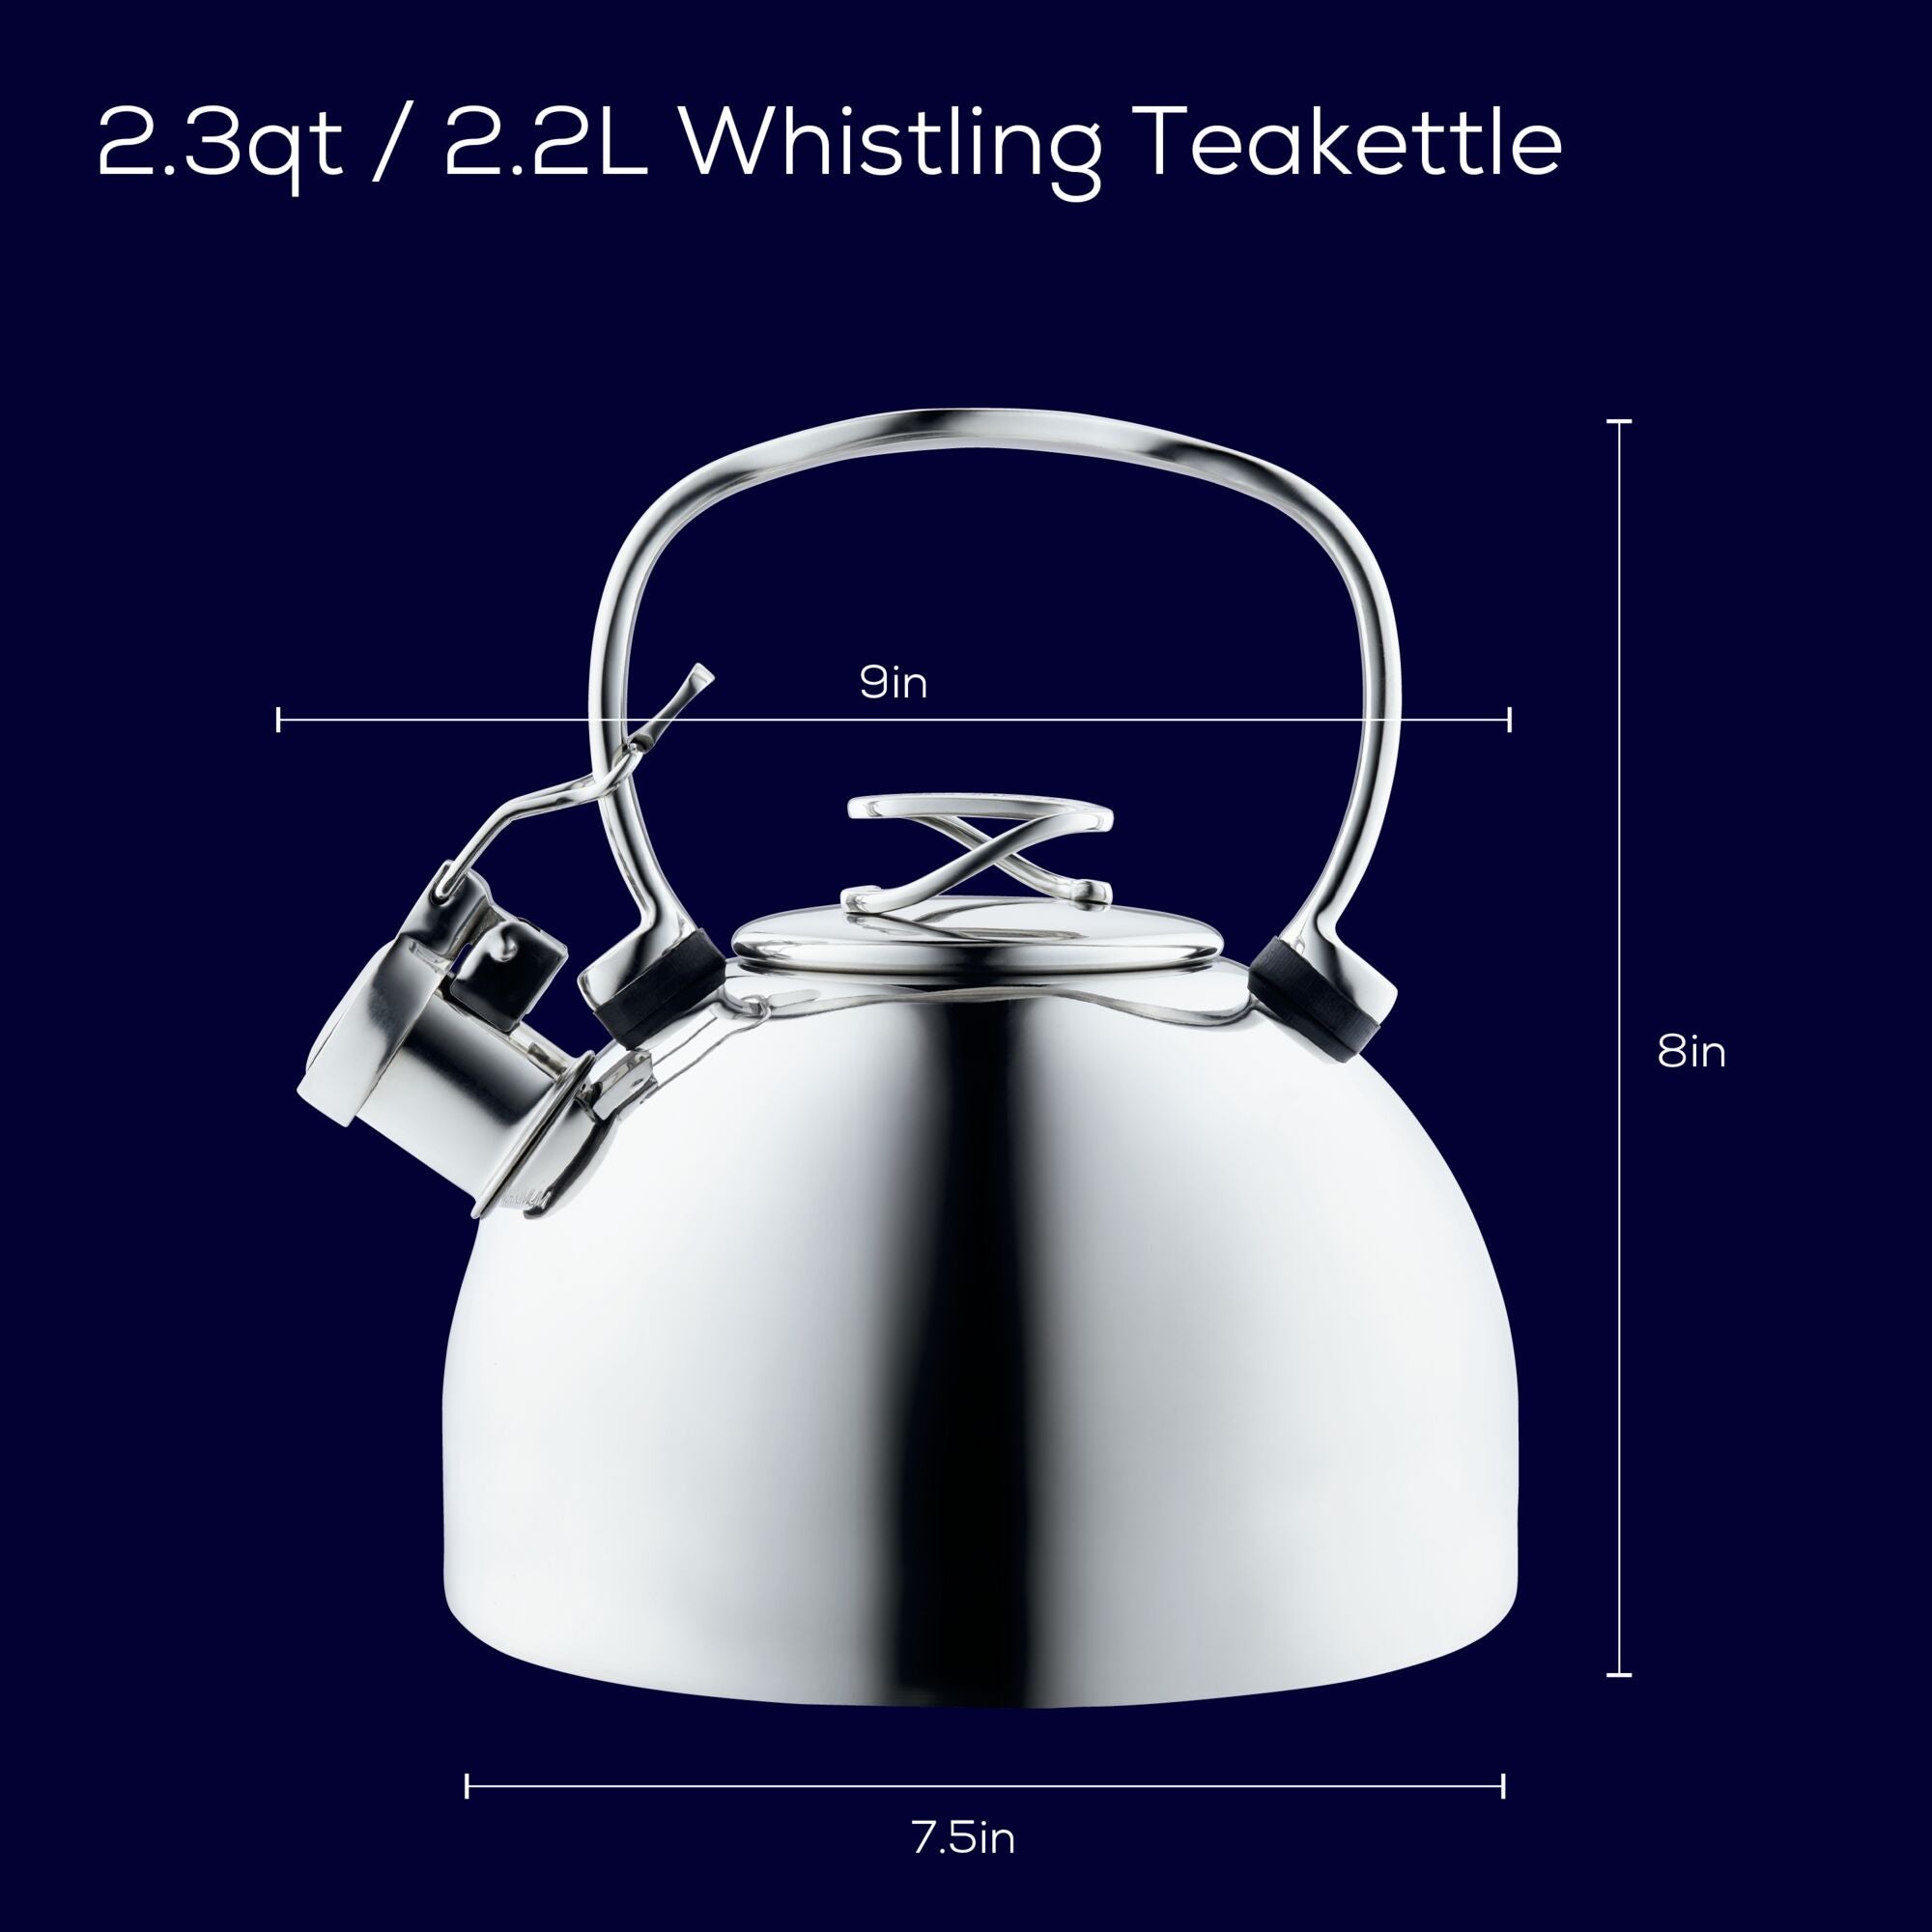 KitchenAid Stainless Steel 1.9-qt. Tea Kettle, Color: Stainless